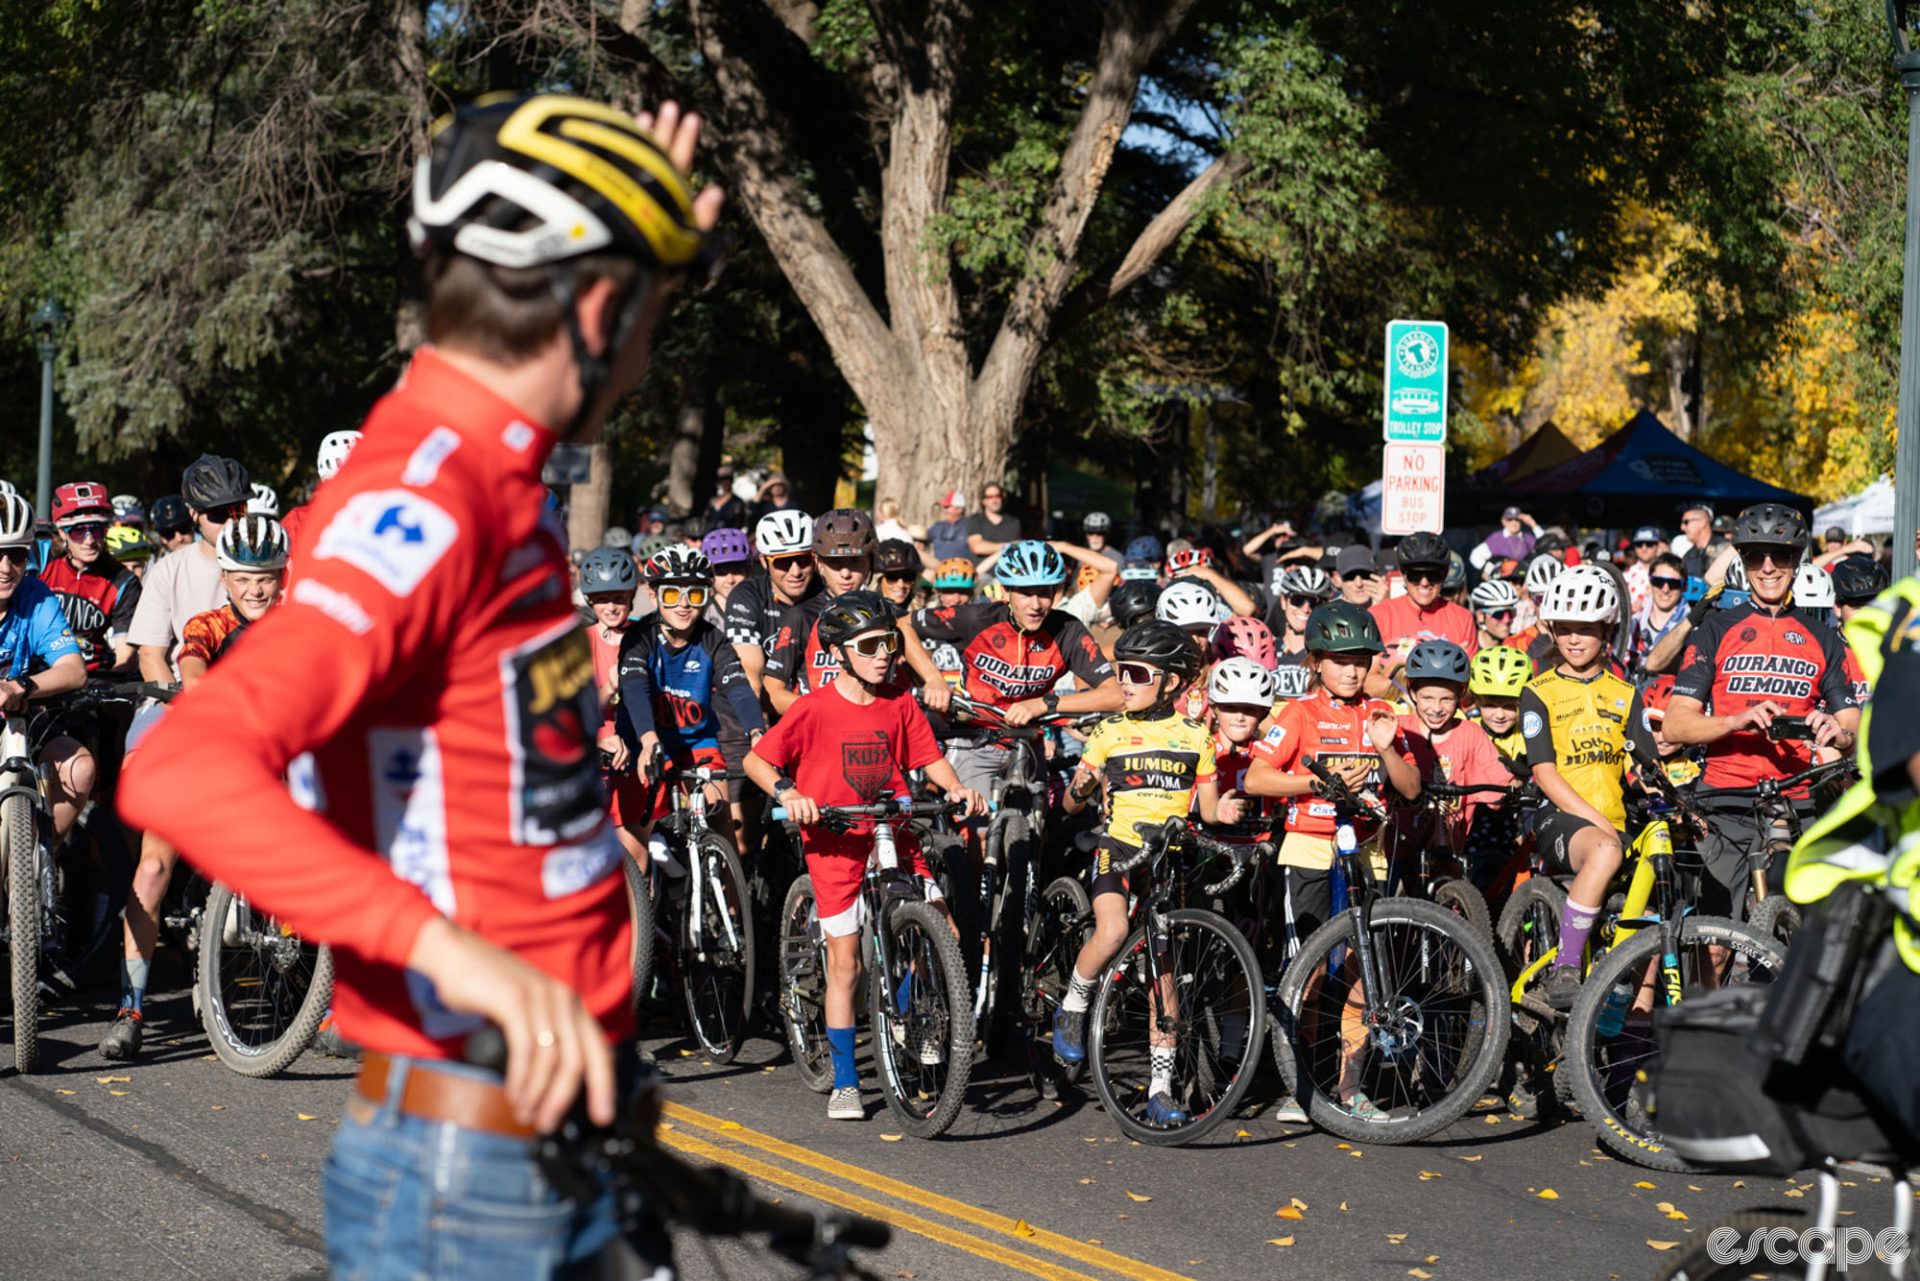 Kuss stands astride a bike, in his red jersey and a helmet, looks back at a crowd of cyclists ready to follow him on a celebratory ride. the front of the massive group is entirely kids, including several dressed in donated Jumbo-Visma  jerseys.